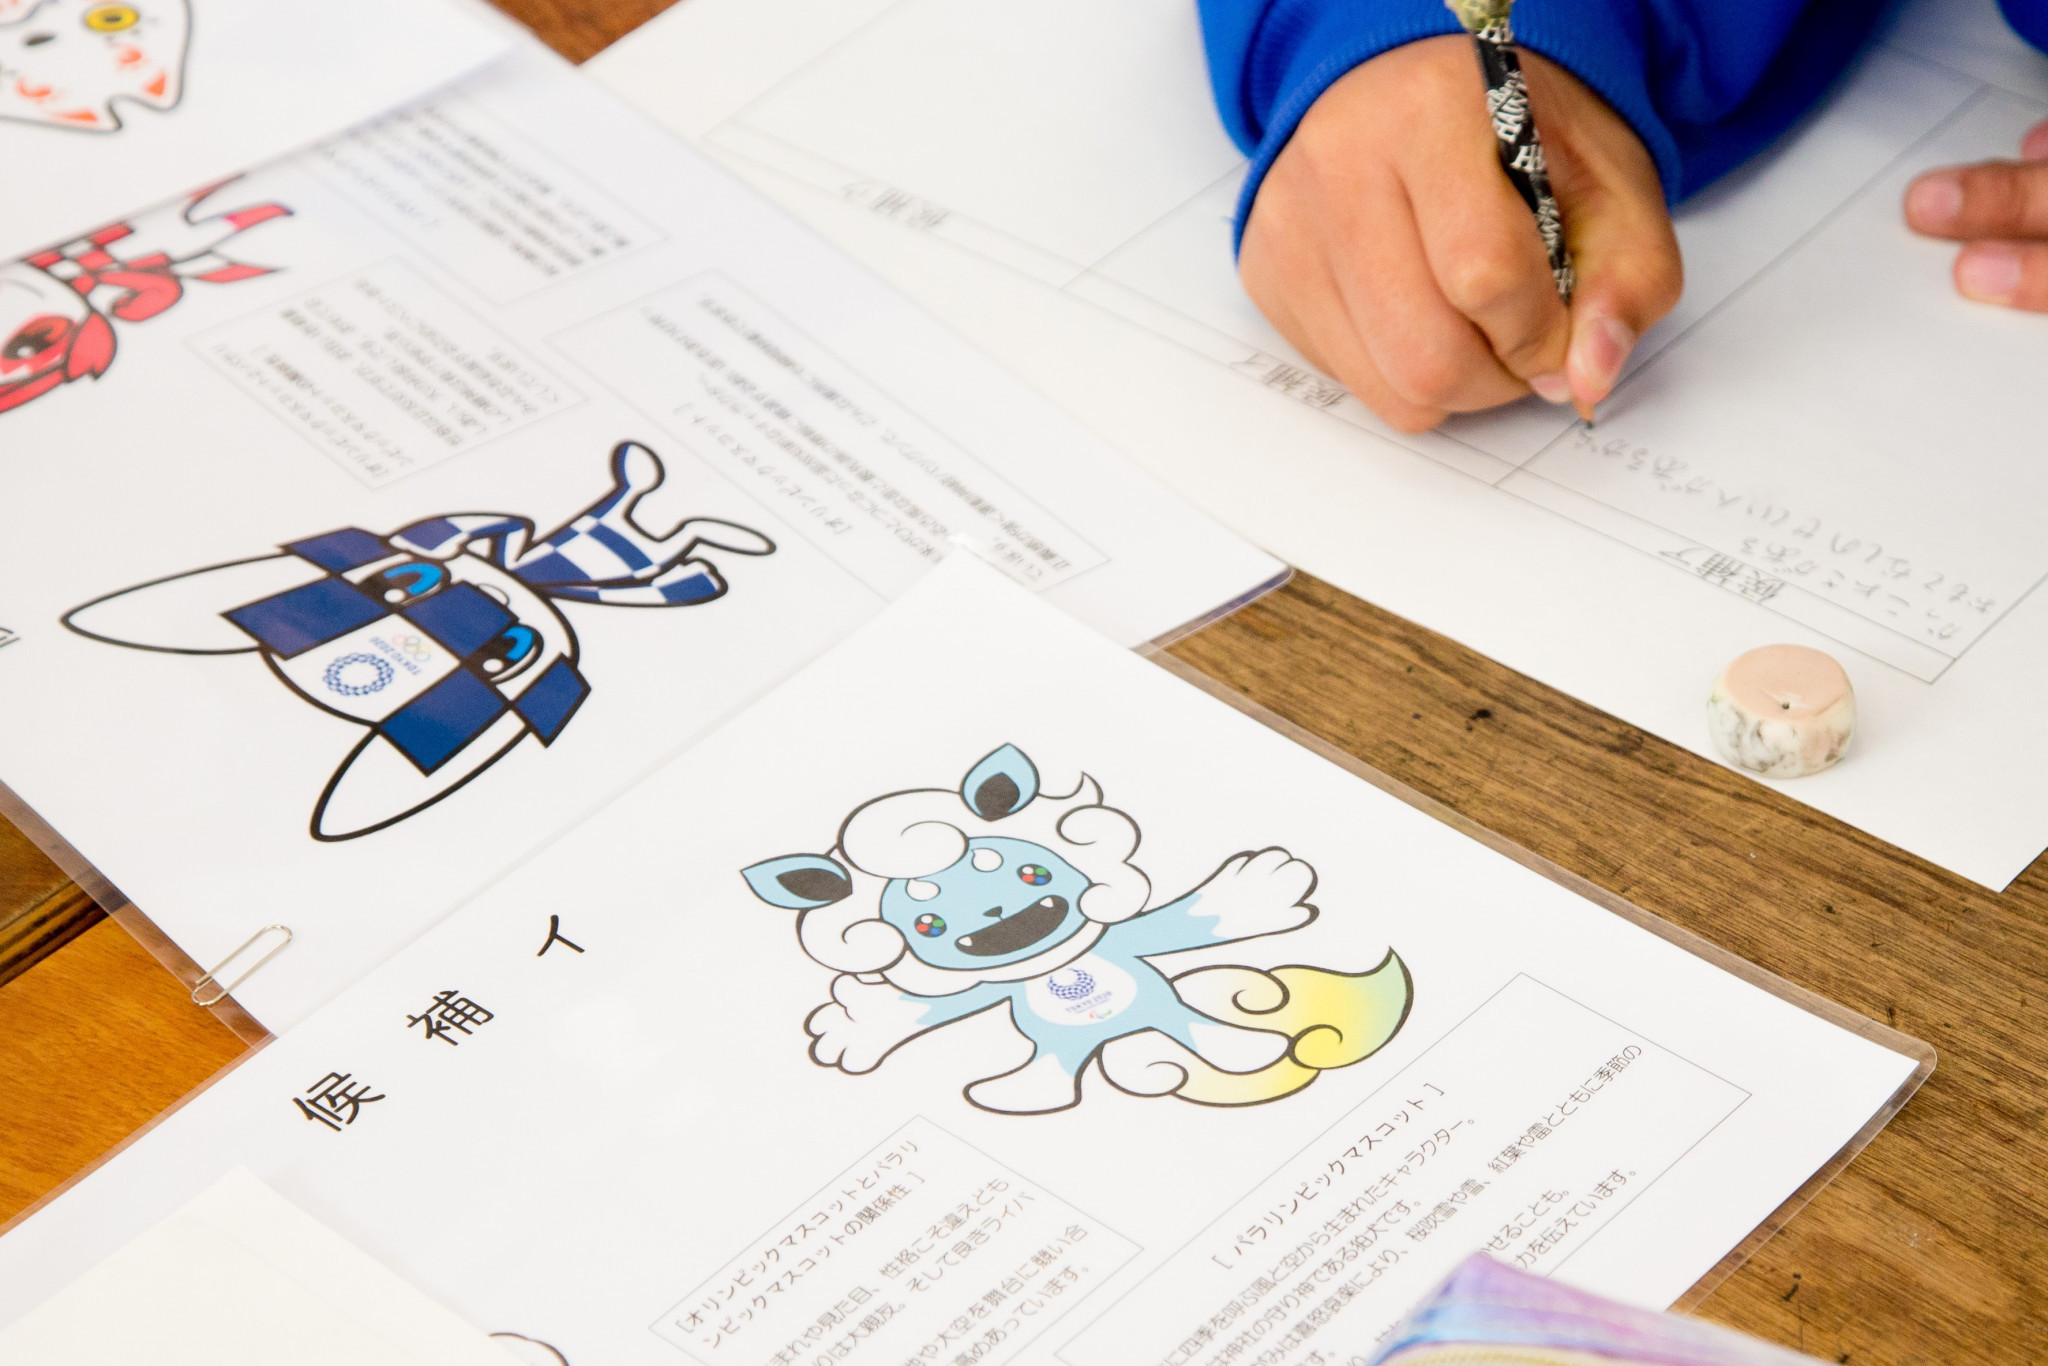 Schools have been given proposed lesson plans to incorporate the mascot selection process ©Tokyo 2020